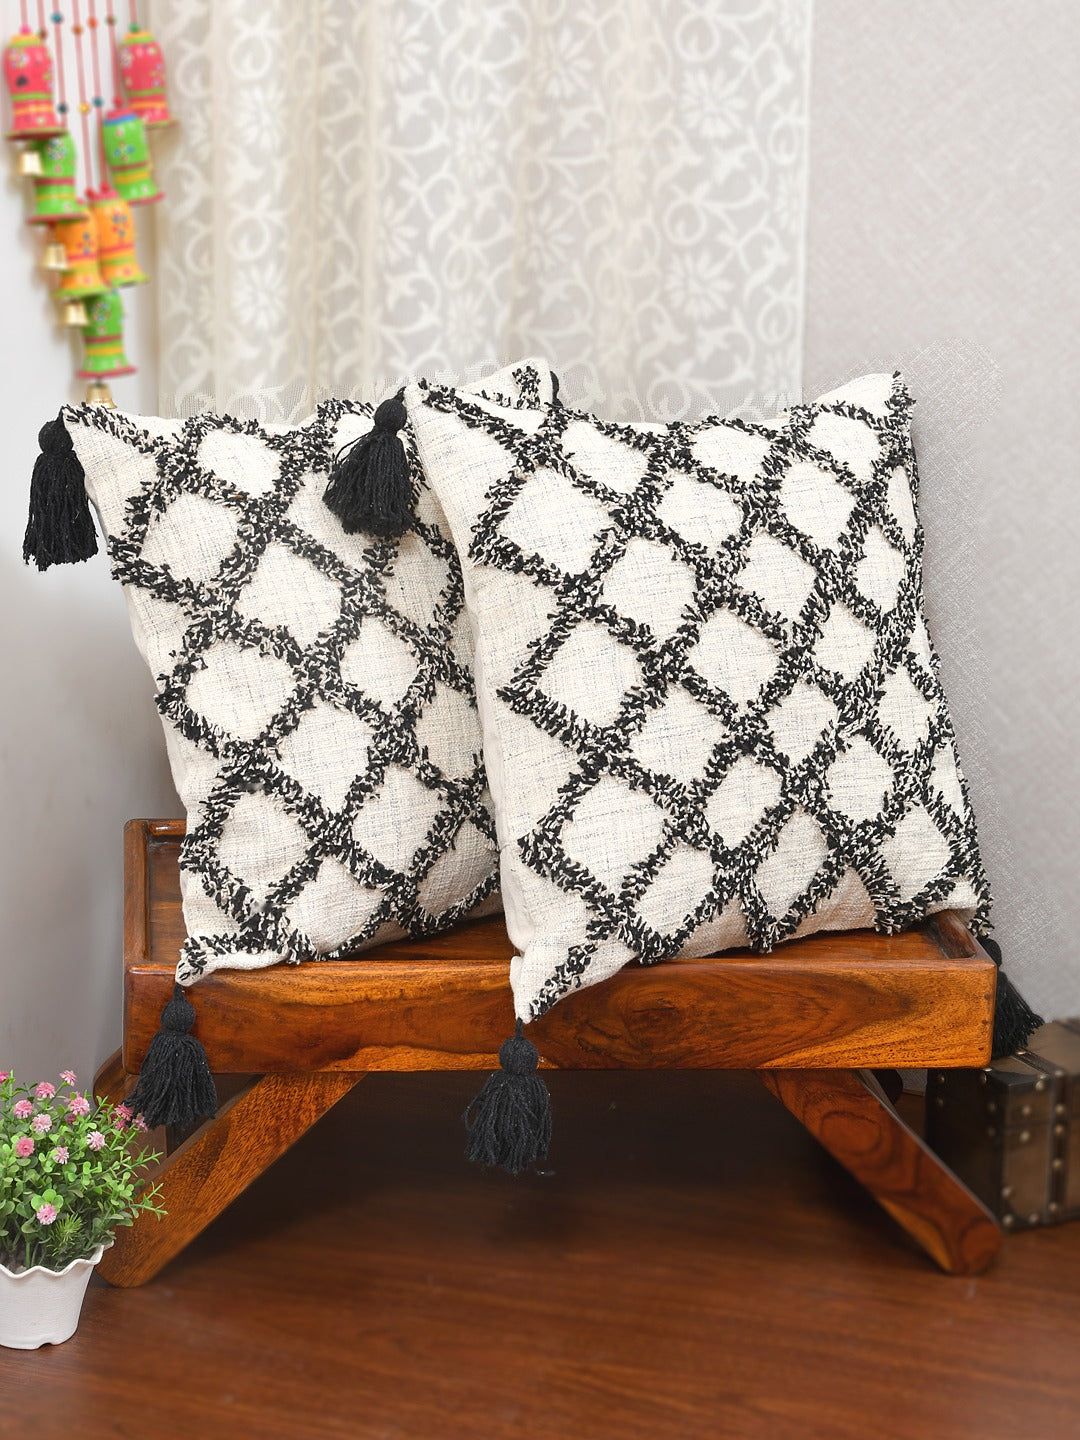 Set of 2 Cotton Cushion Covers - 16 Inches